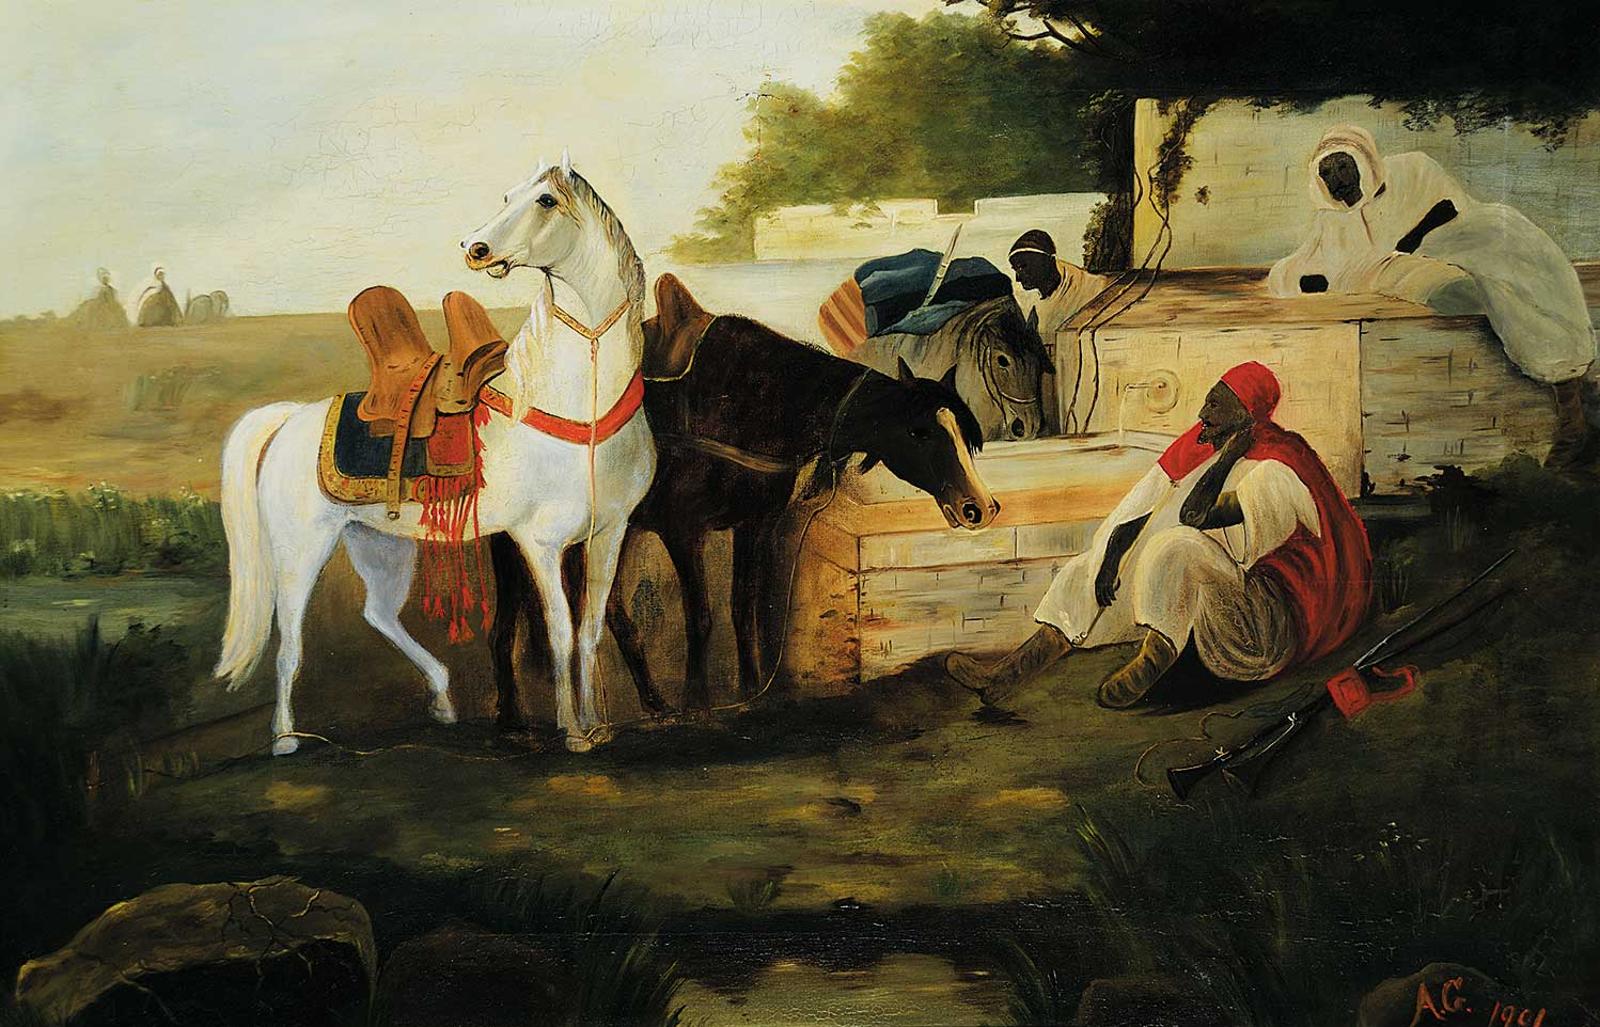 European School - Untitled - Giving the Horses a Rest